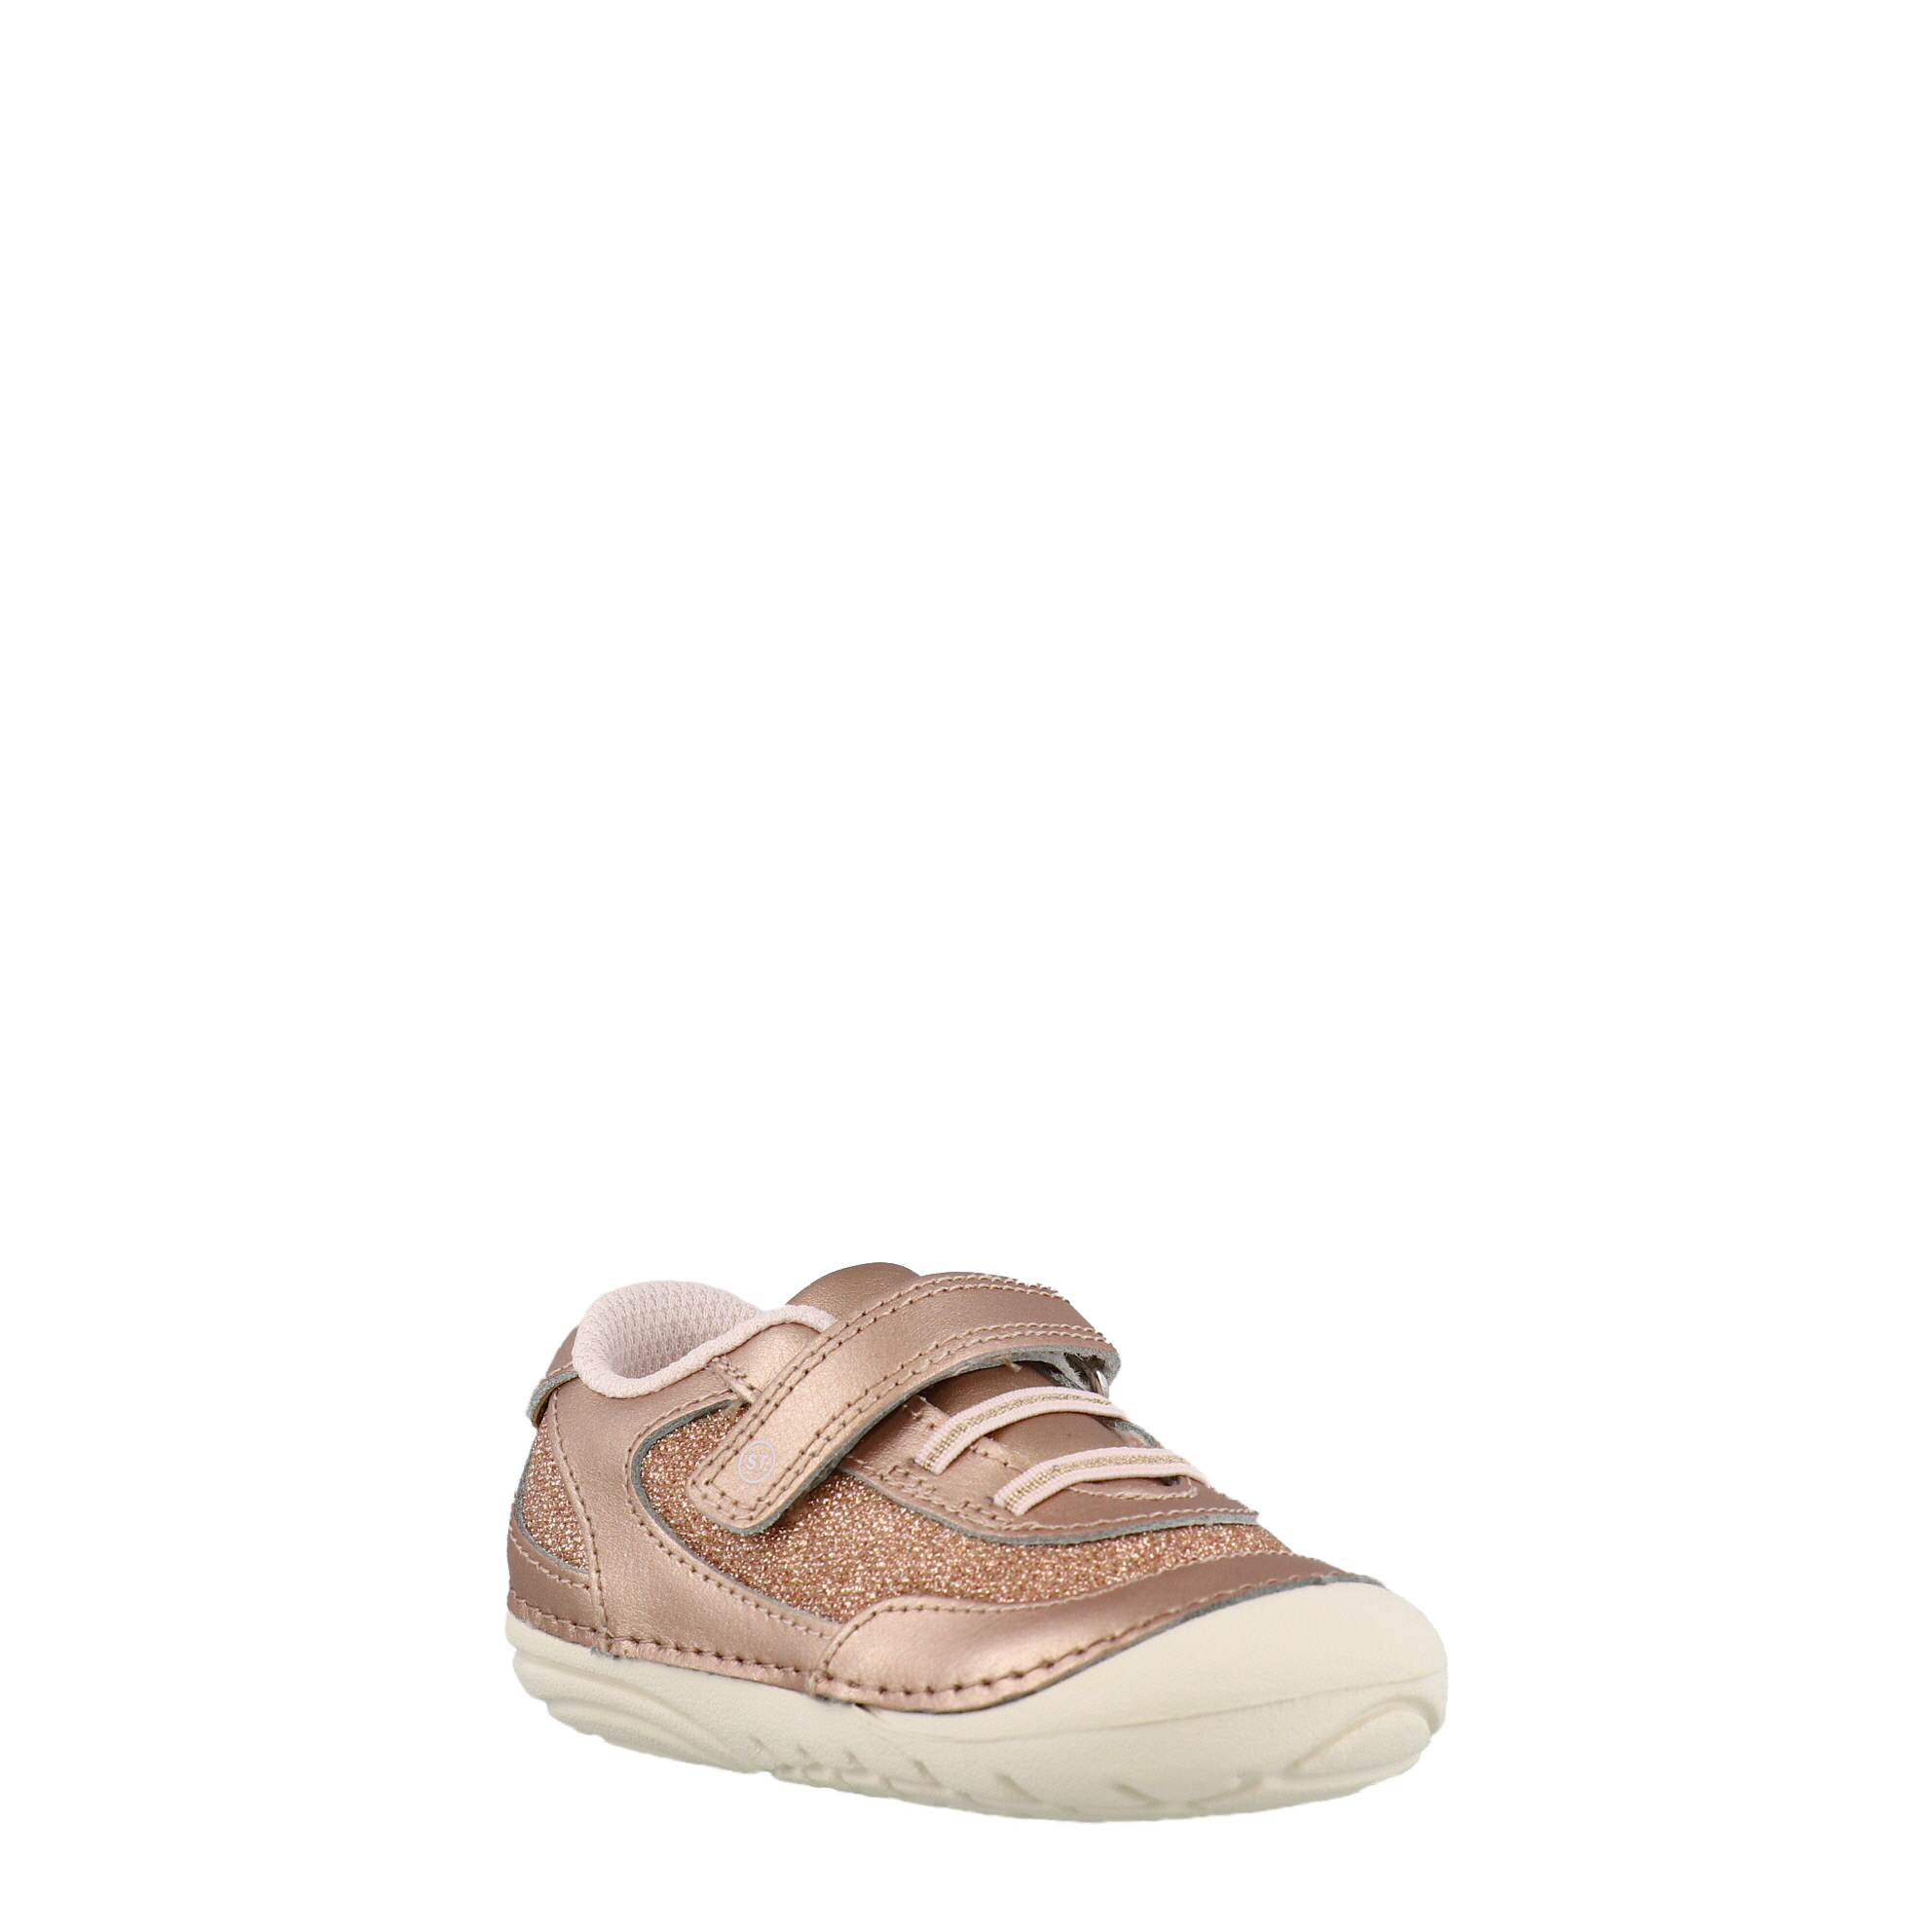 AW21_STRIDE_JAZZY-BABY_ROSEGOLD_02